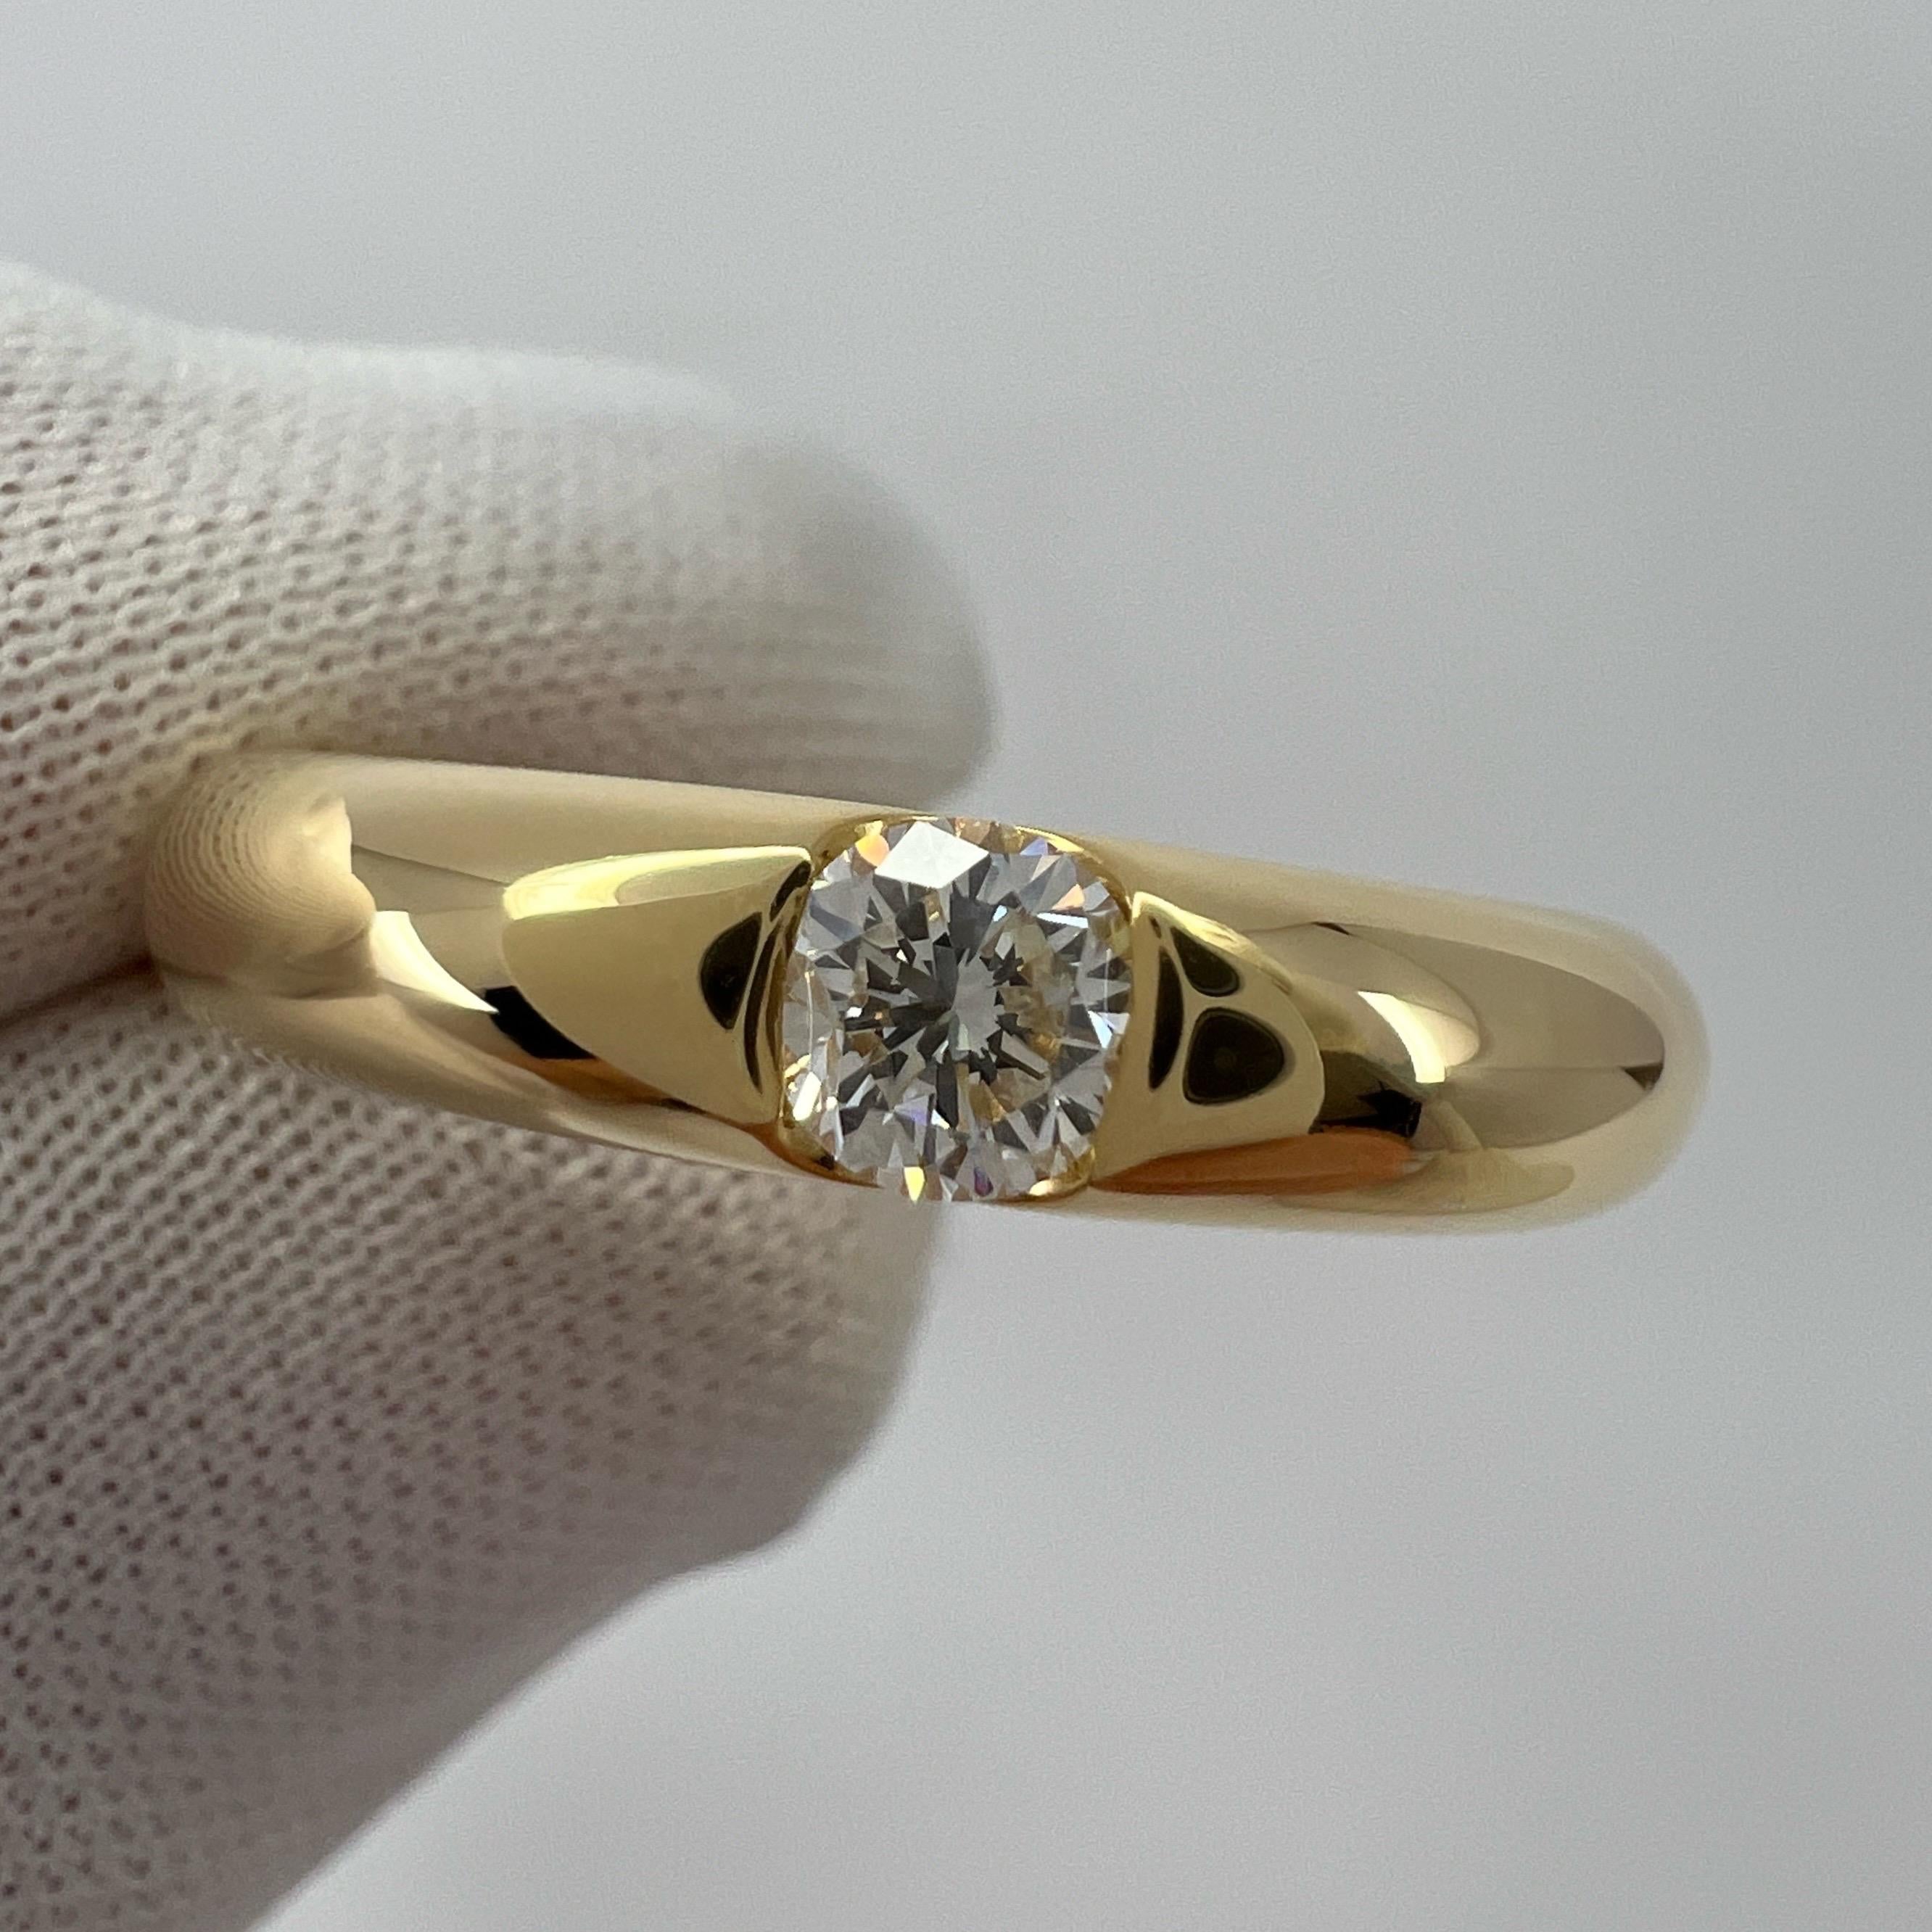 Vintage Cartier Round Diamond Ellipse 18k Yellow Gold Solitaire Band Ring US5 49 For Sale 5